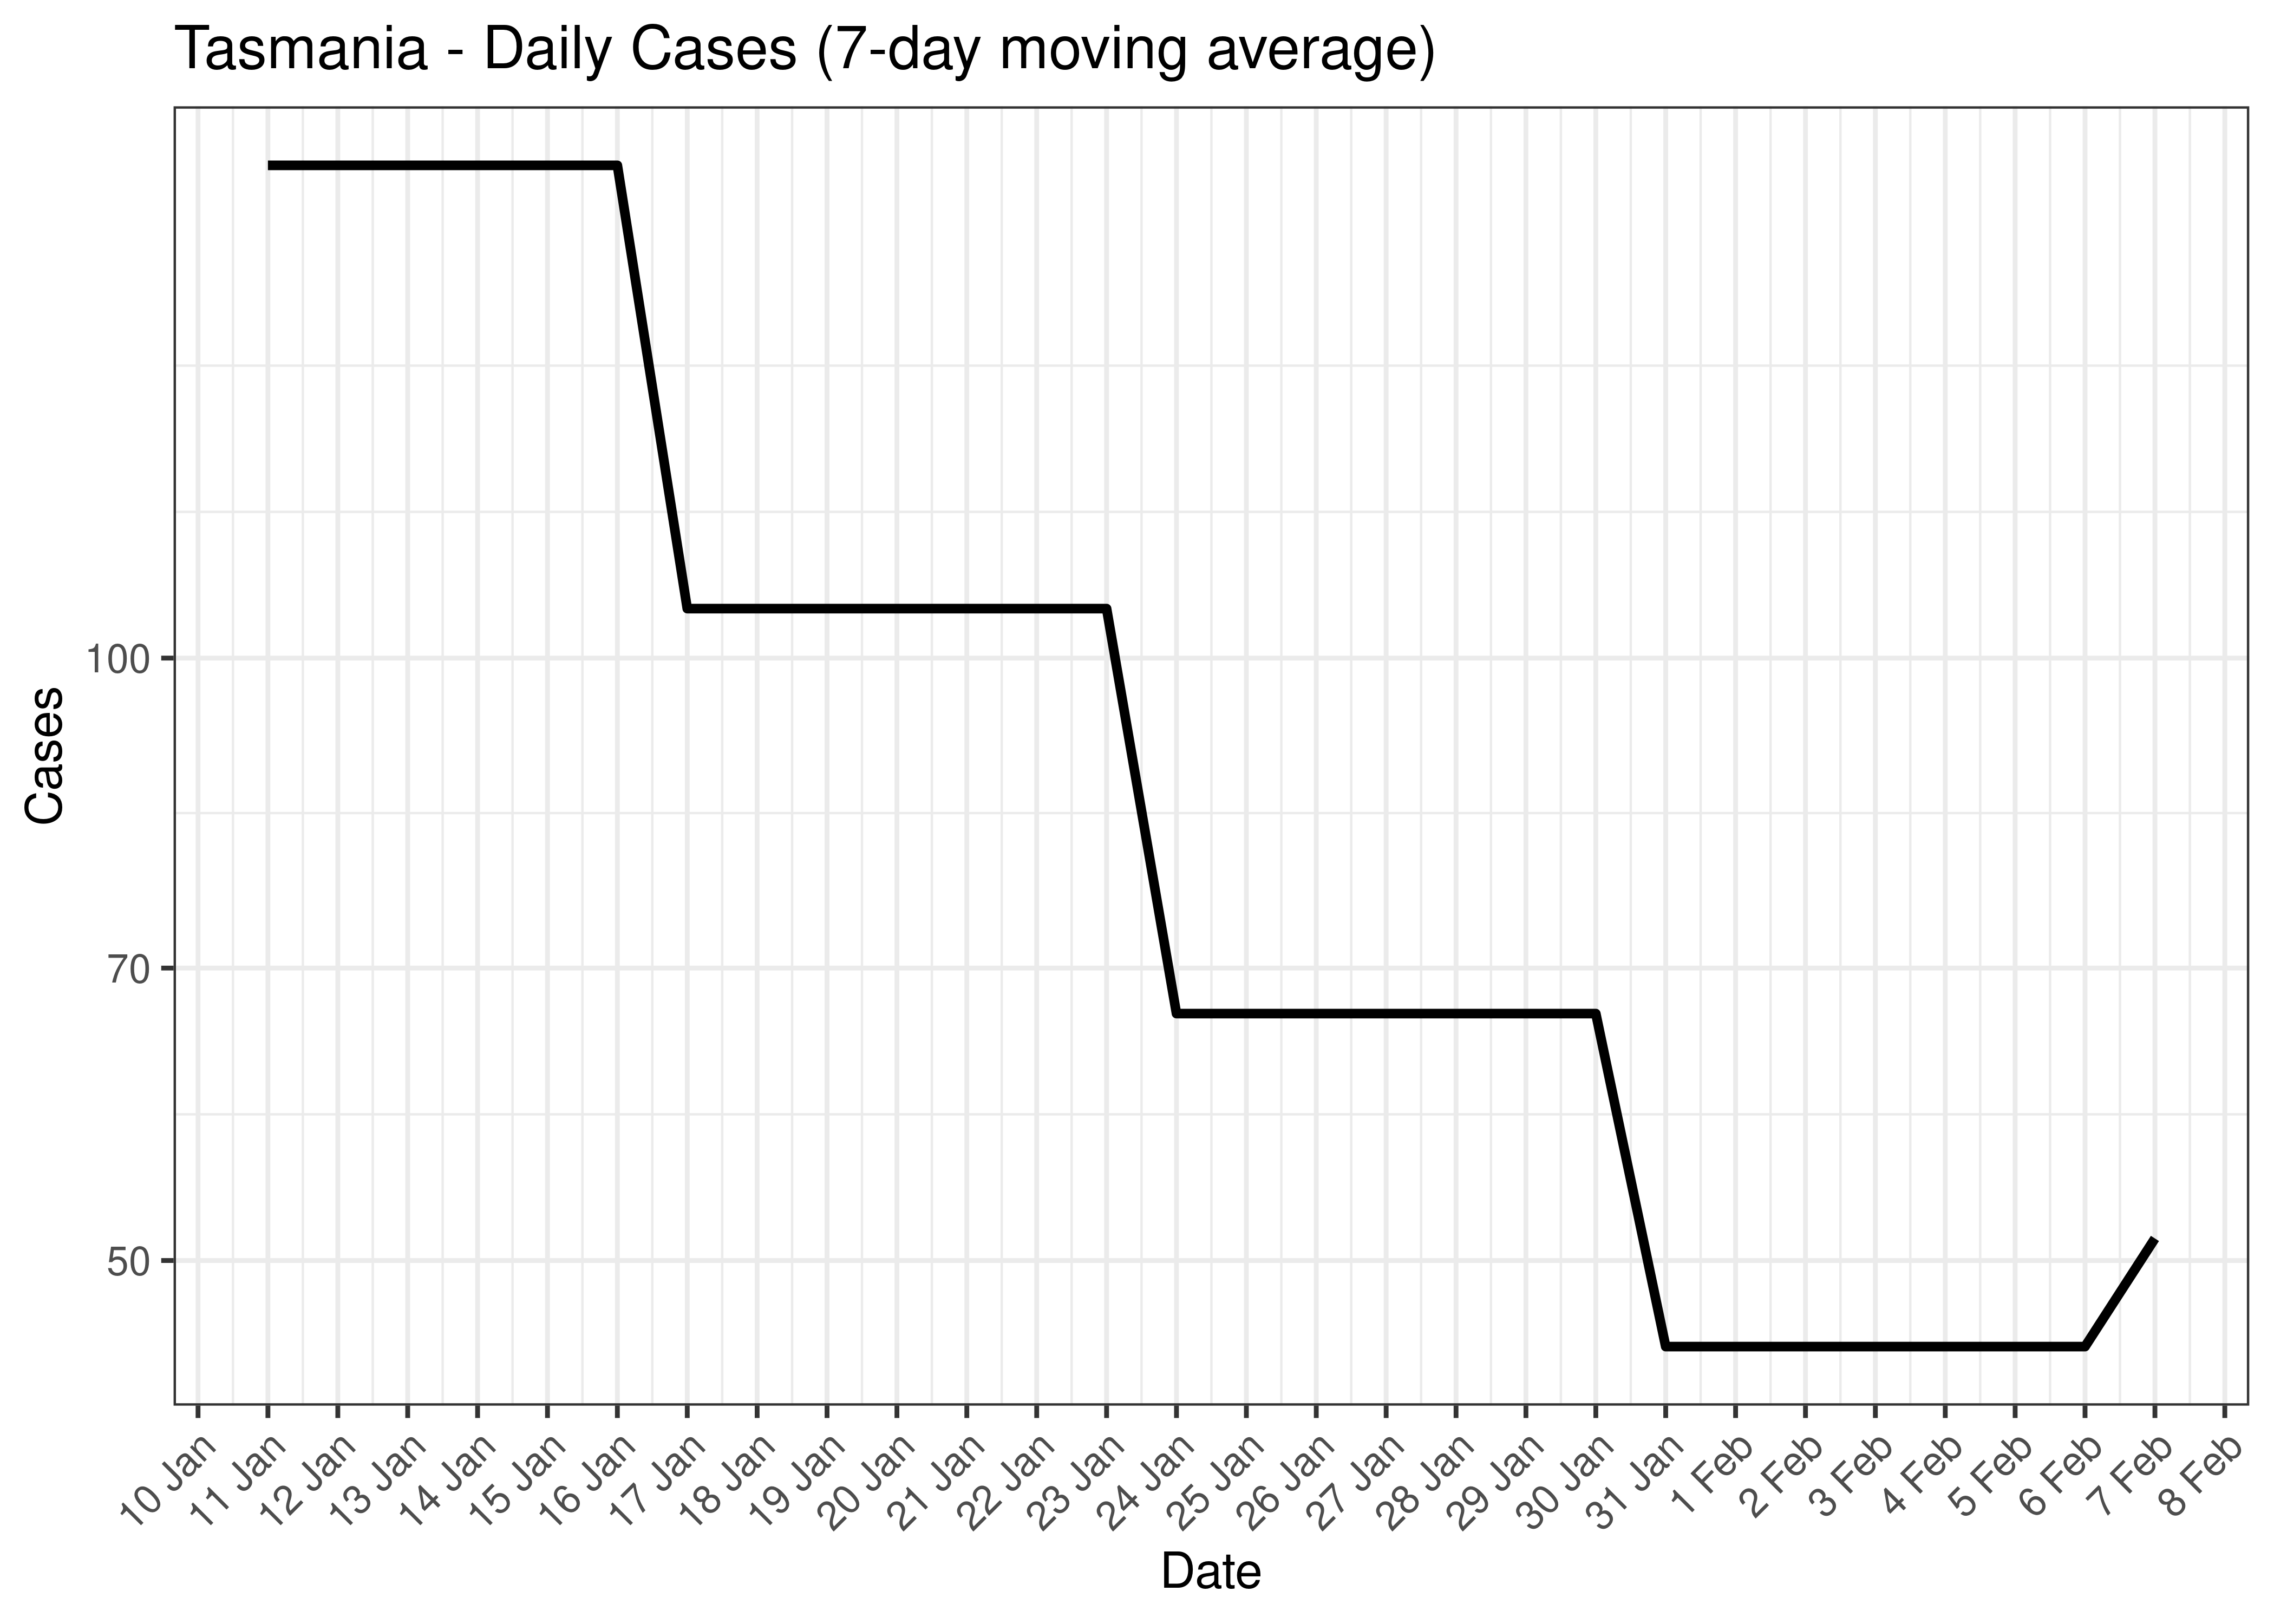 South Australia - Daily Cases, Hospital Counts and Deaths (7-day moving average)